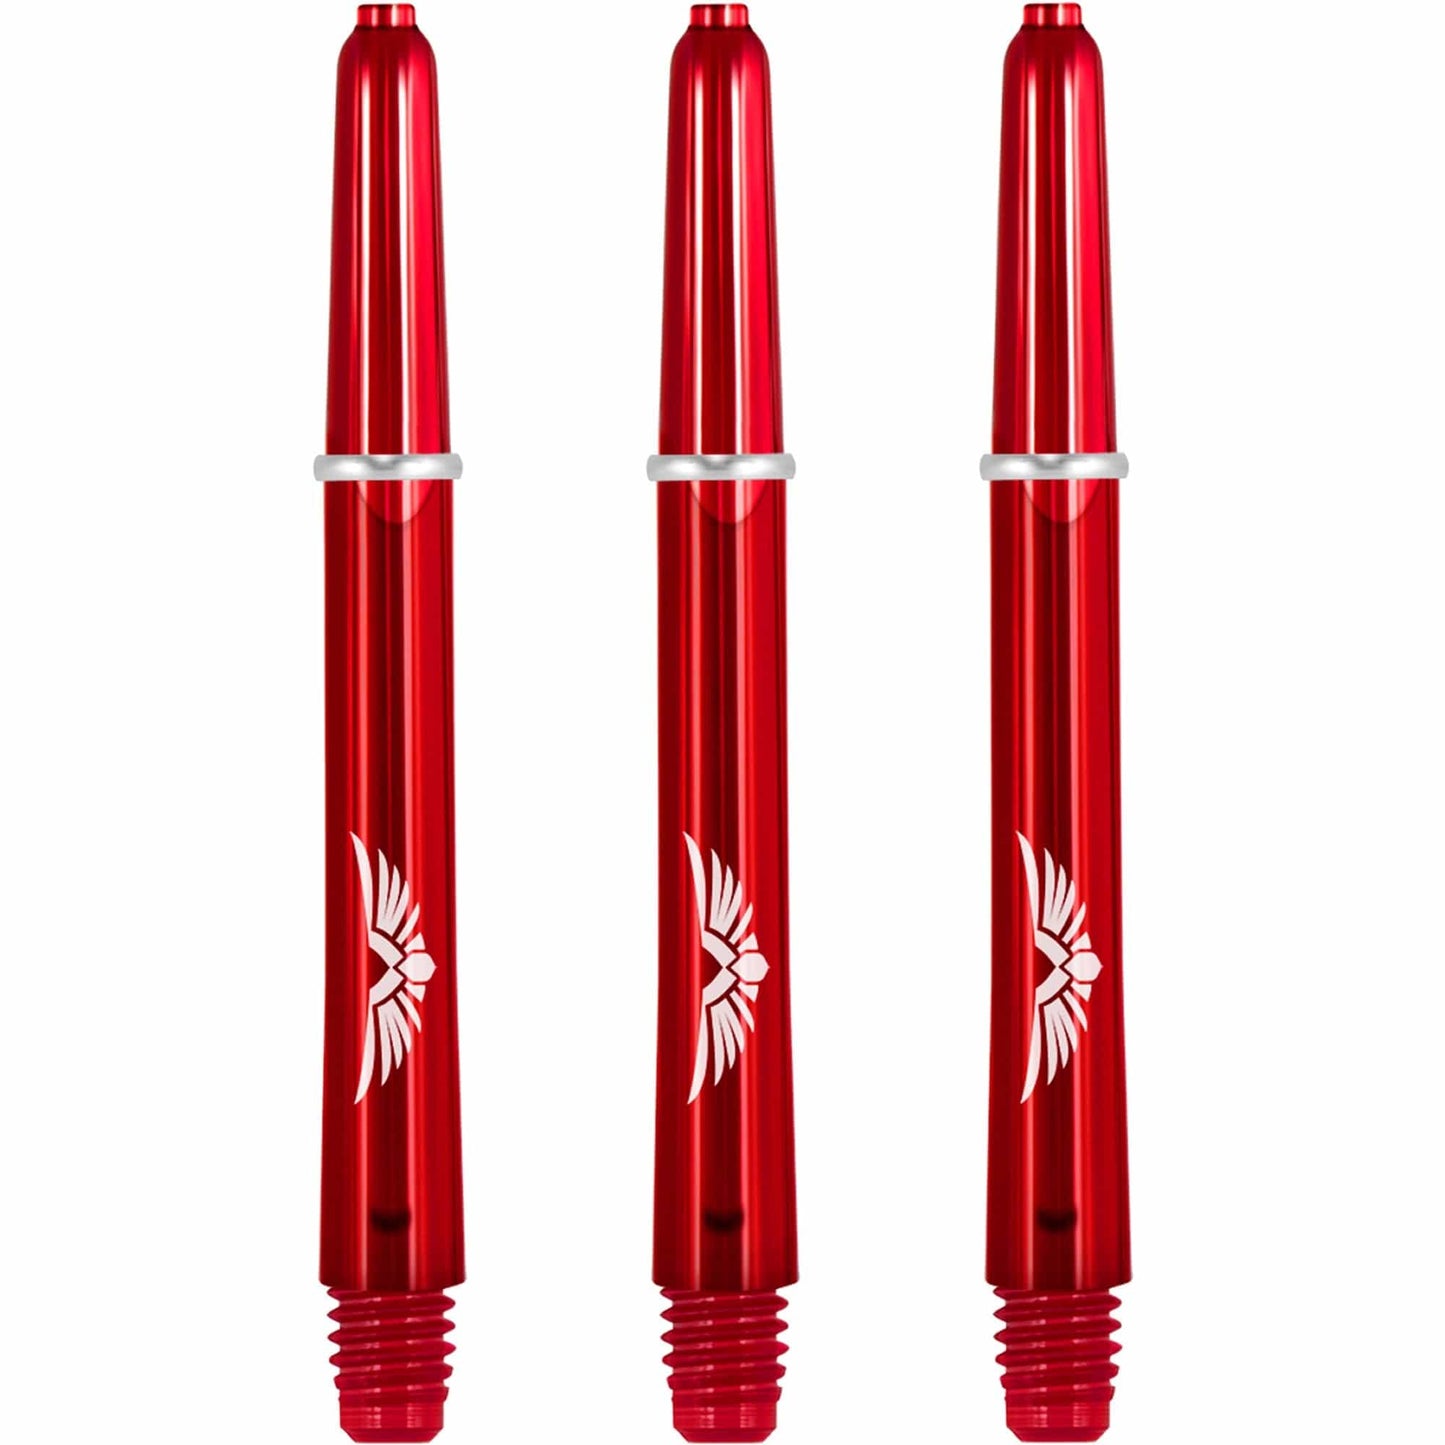 Shot Eagle Claw Dart Shafts - with Machined Rings - Strong Polycarbonate Stems - Red Medium